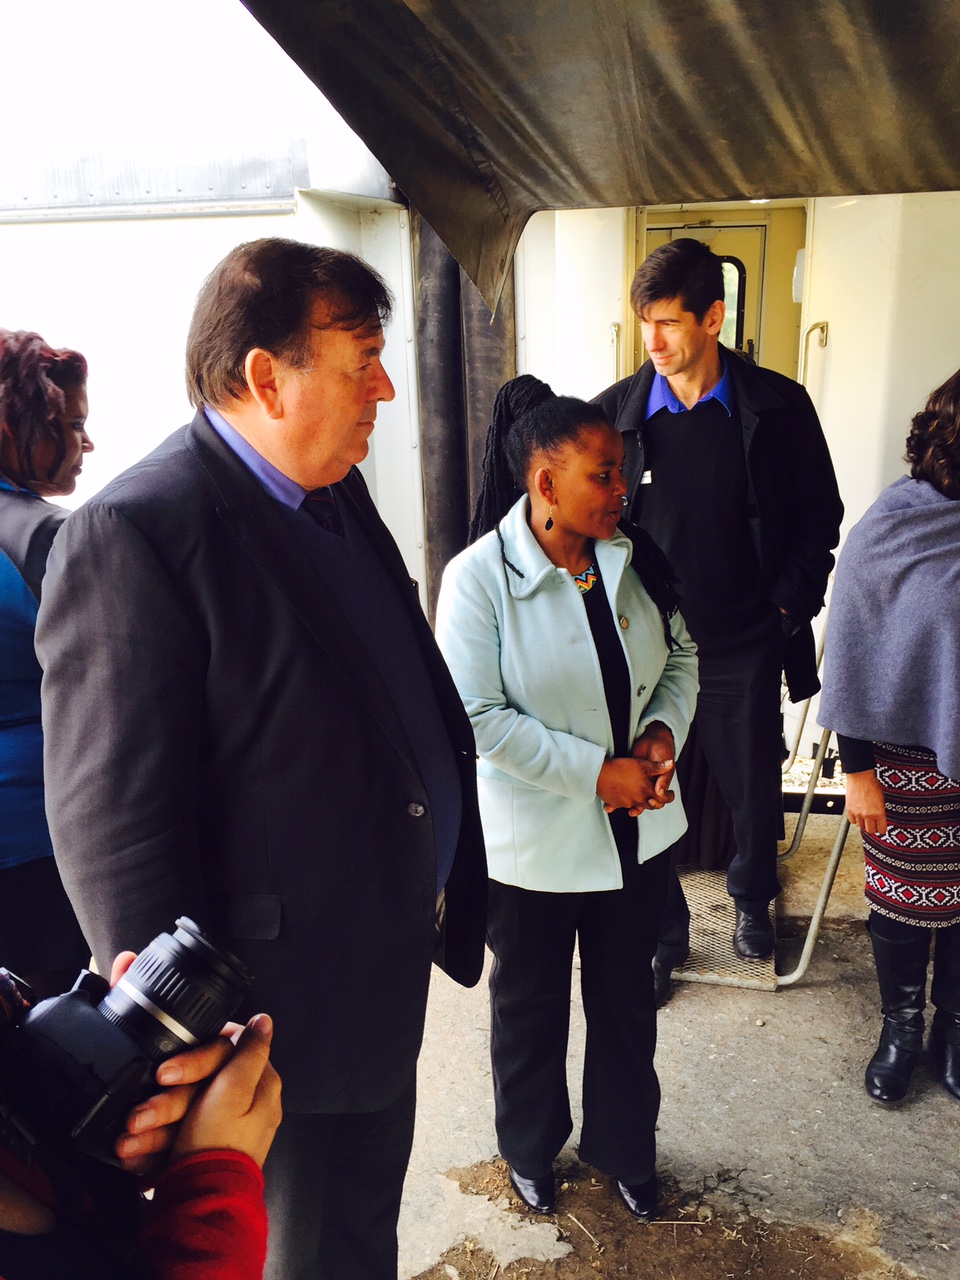 Minister Grant and Minister Mbombo at the Phelophepa Train in De Doorns.